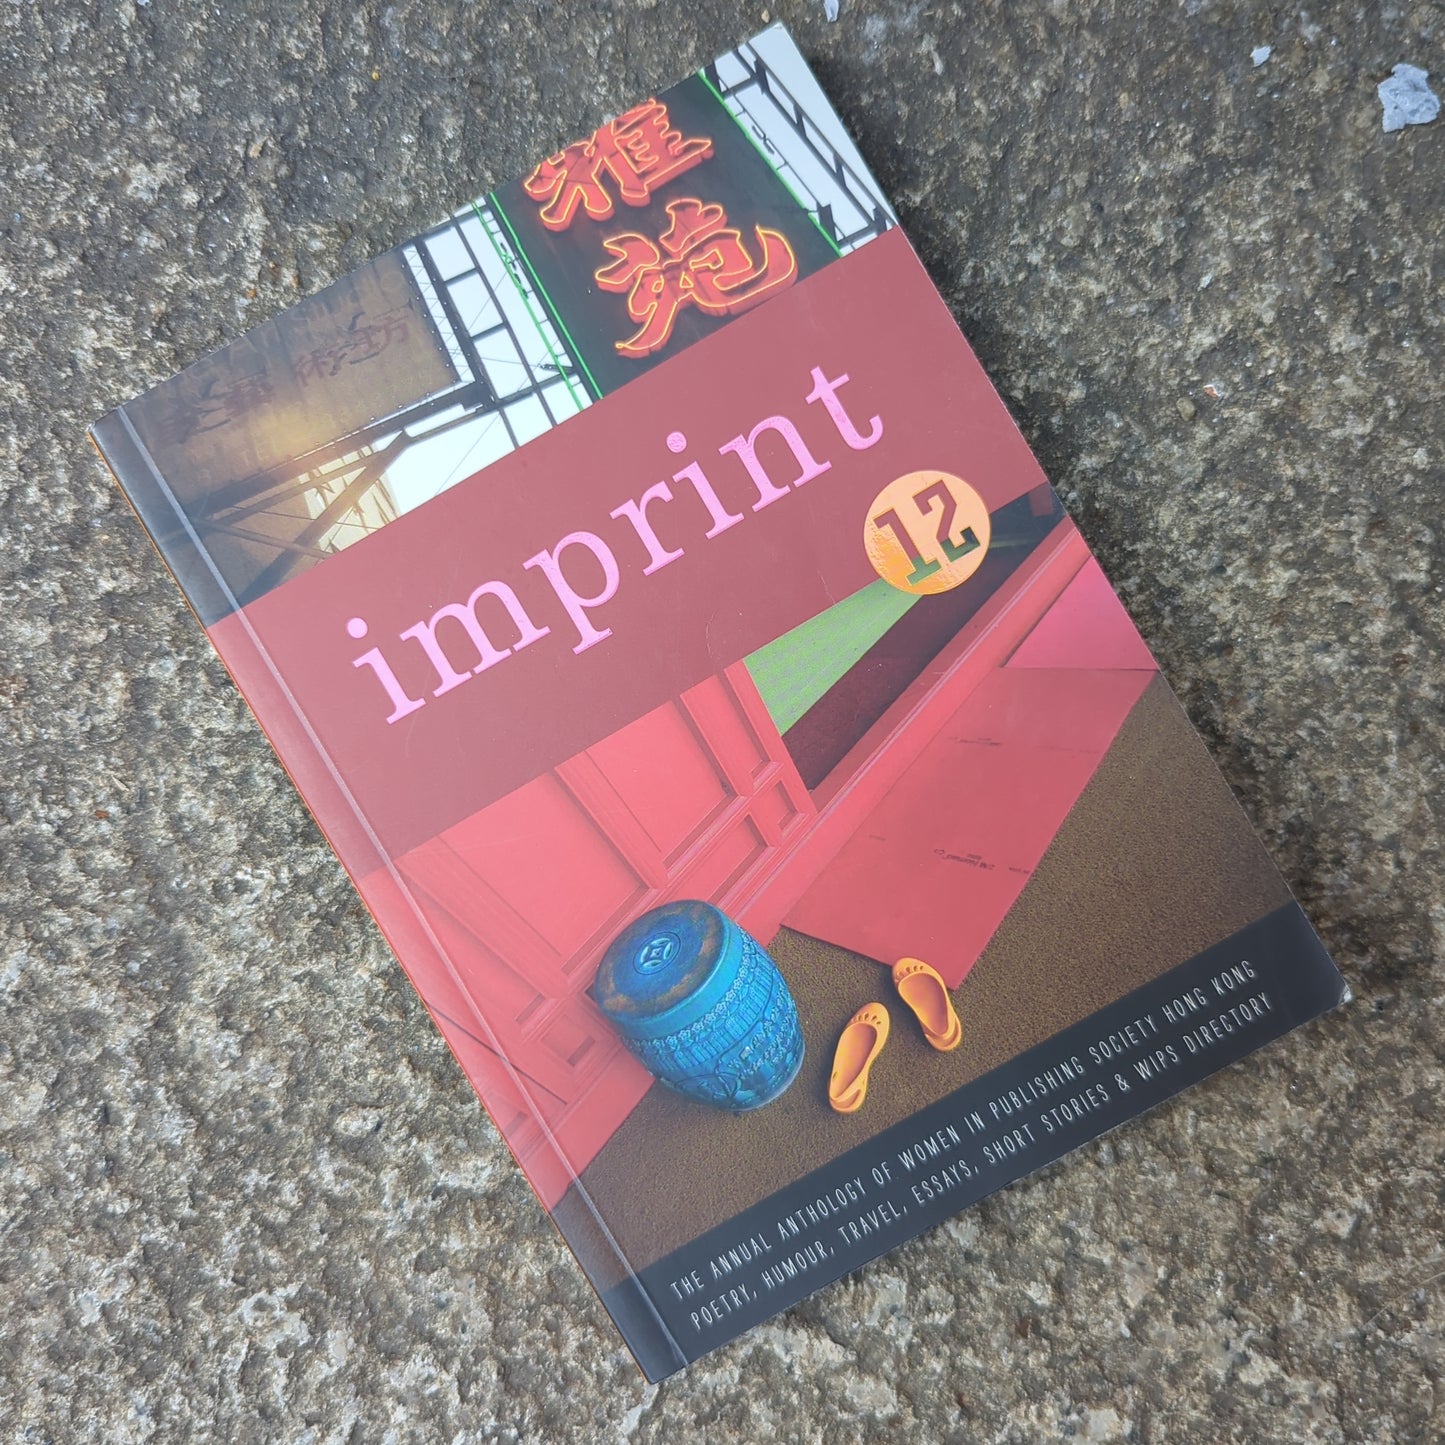 Imprint: The annual anthology of Women in Publishing Society in Hong Kong vol. 12